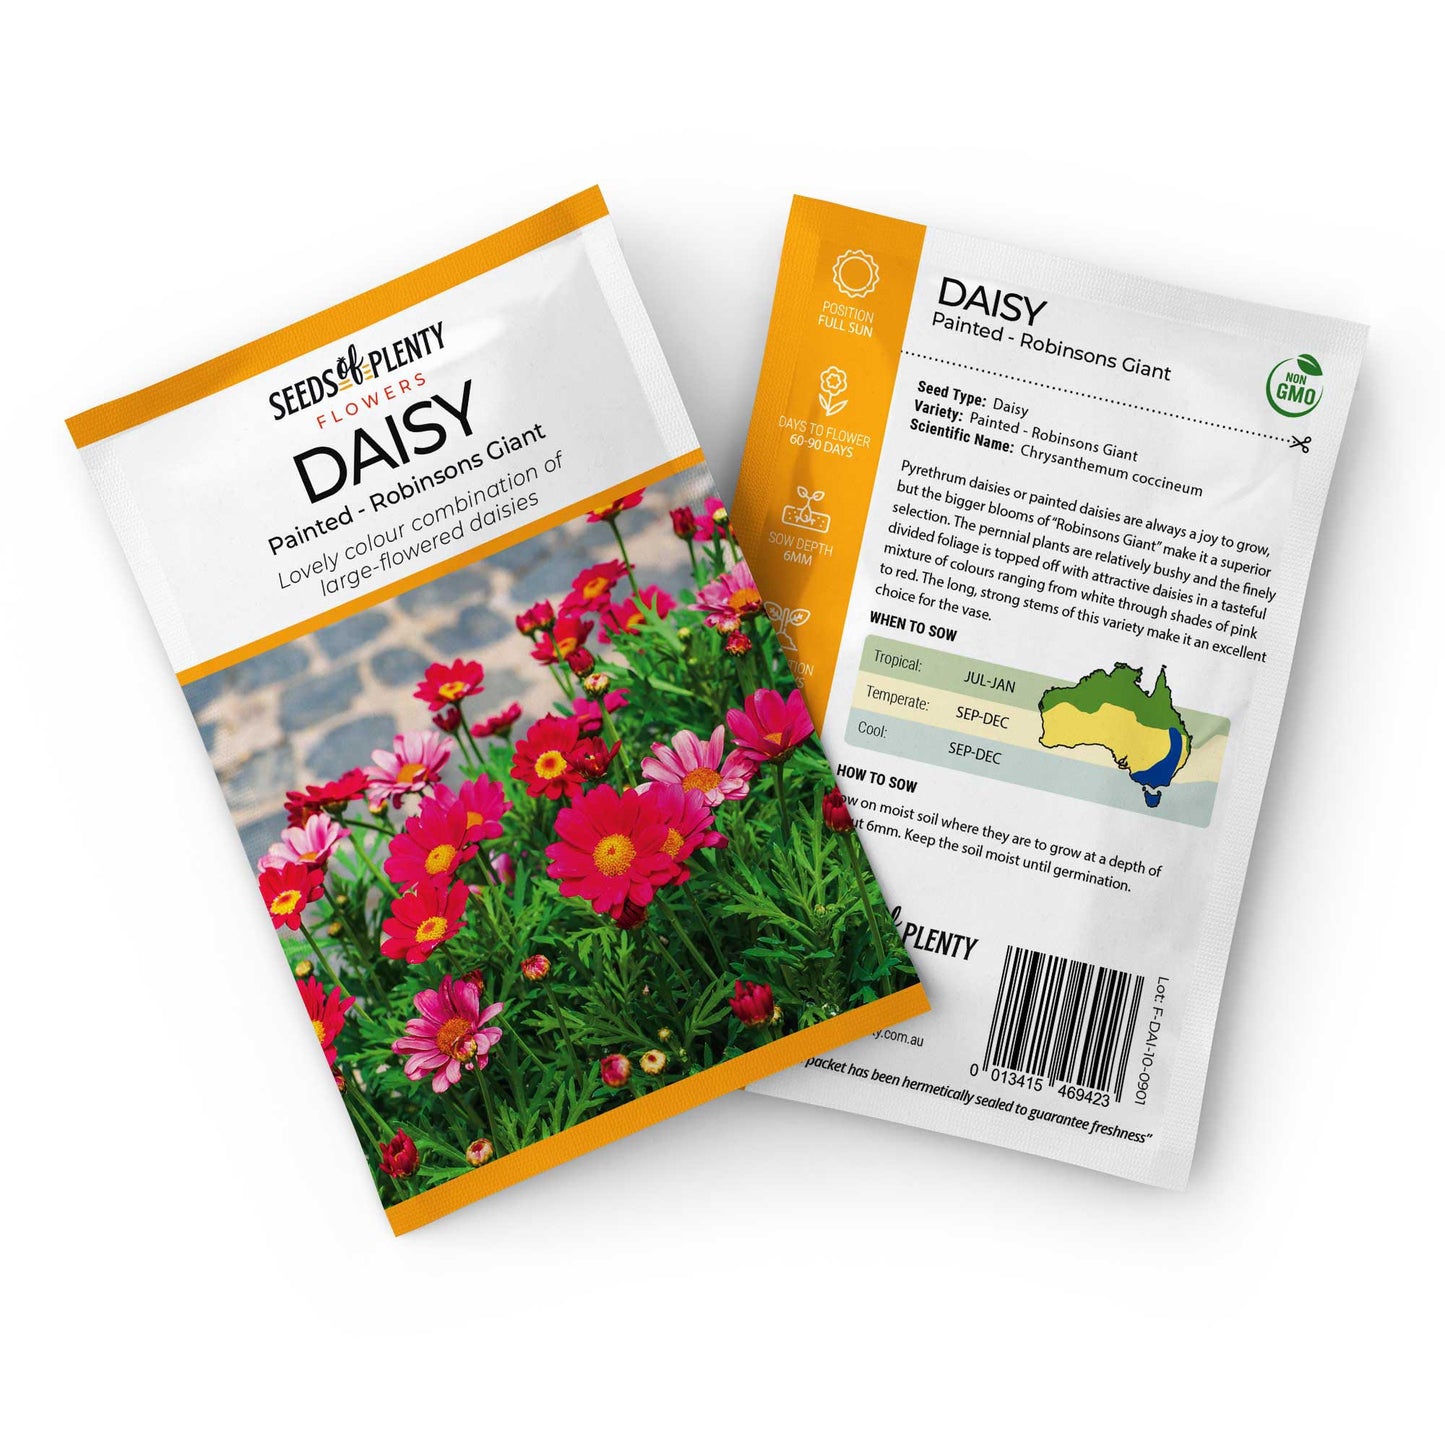 DAISY  - Painted - Robinsons Giant